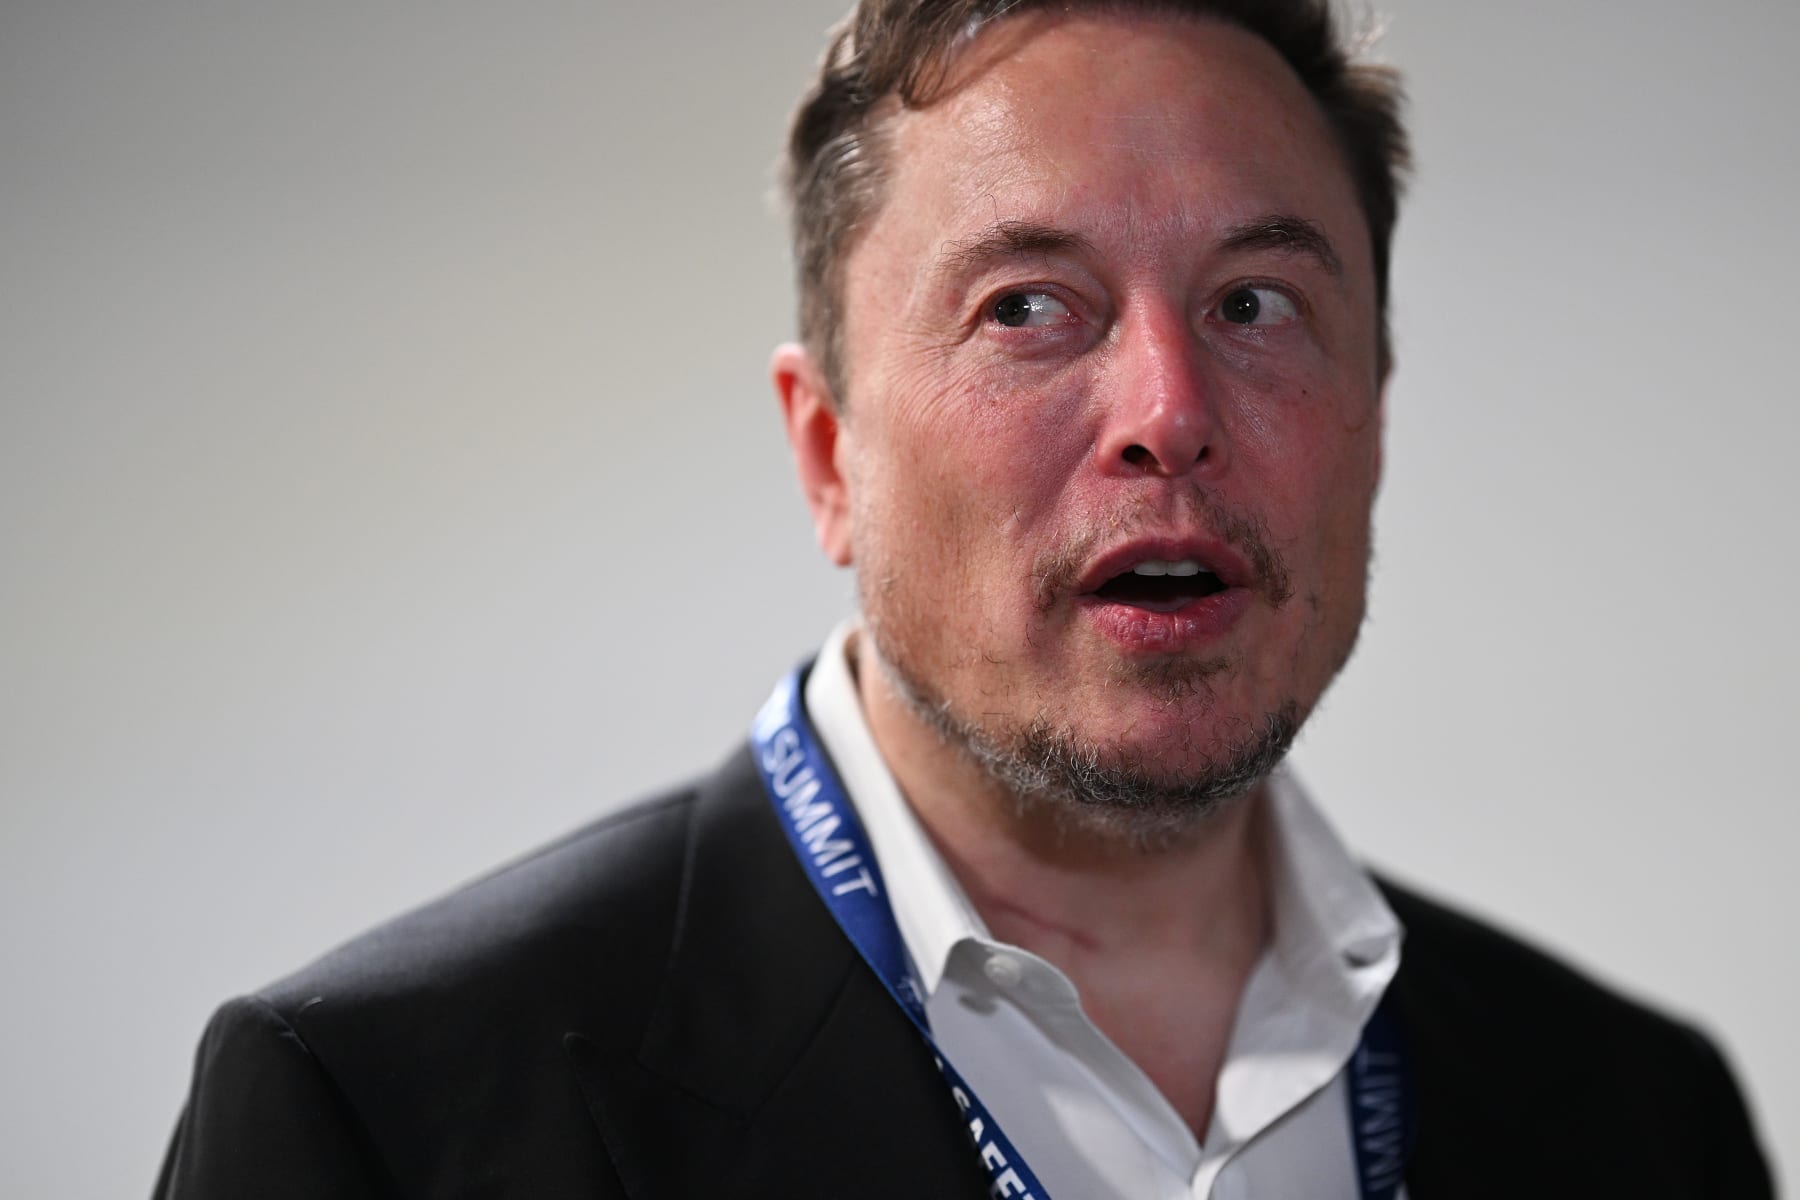 Elon Musk Says He’s Still Interested in Mark Zuckerberg Fight: ‘Any Place, Any Rule’ – Bleacher Report